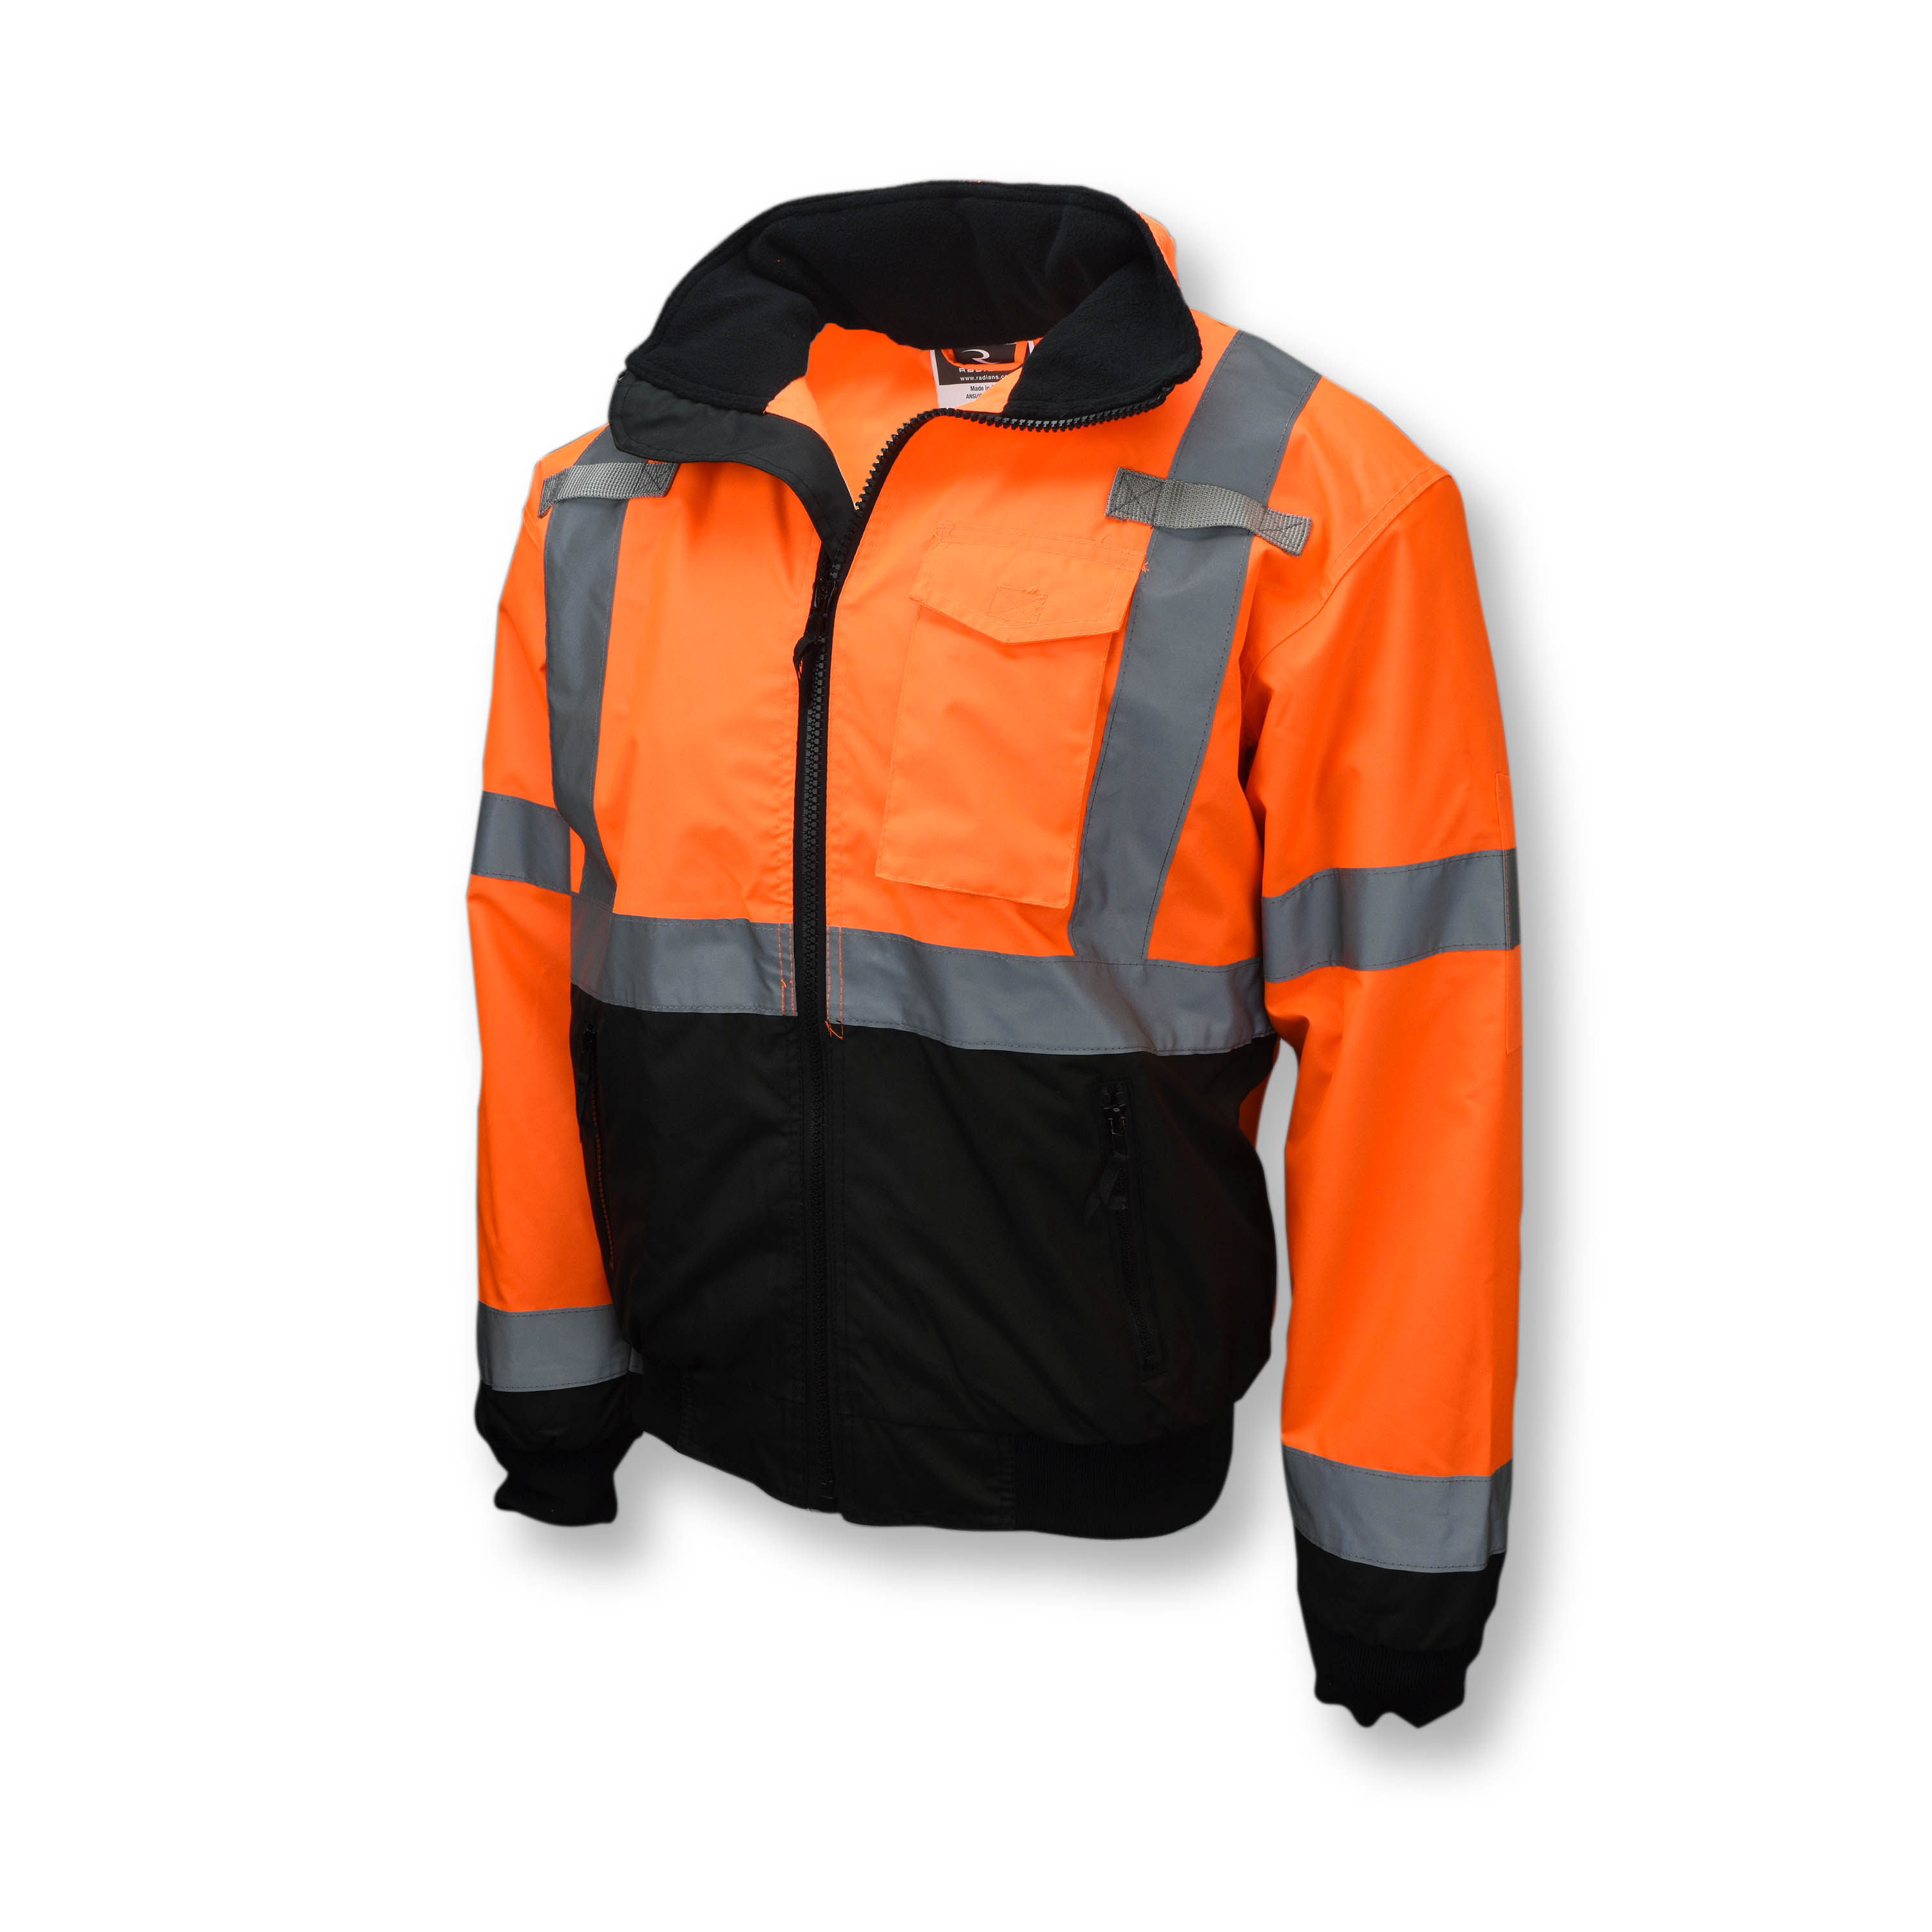 SJ110B Class 3 Two-in-One High Visibility Bomber Safety Jacket - Orange/Black Bottom - Size 5X